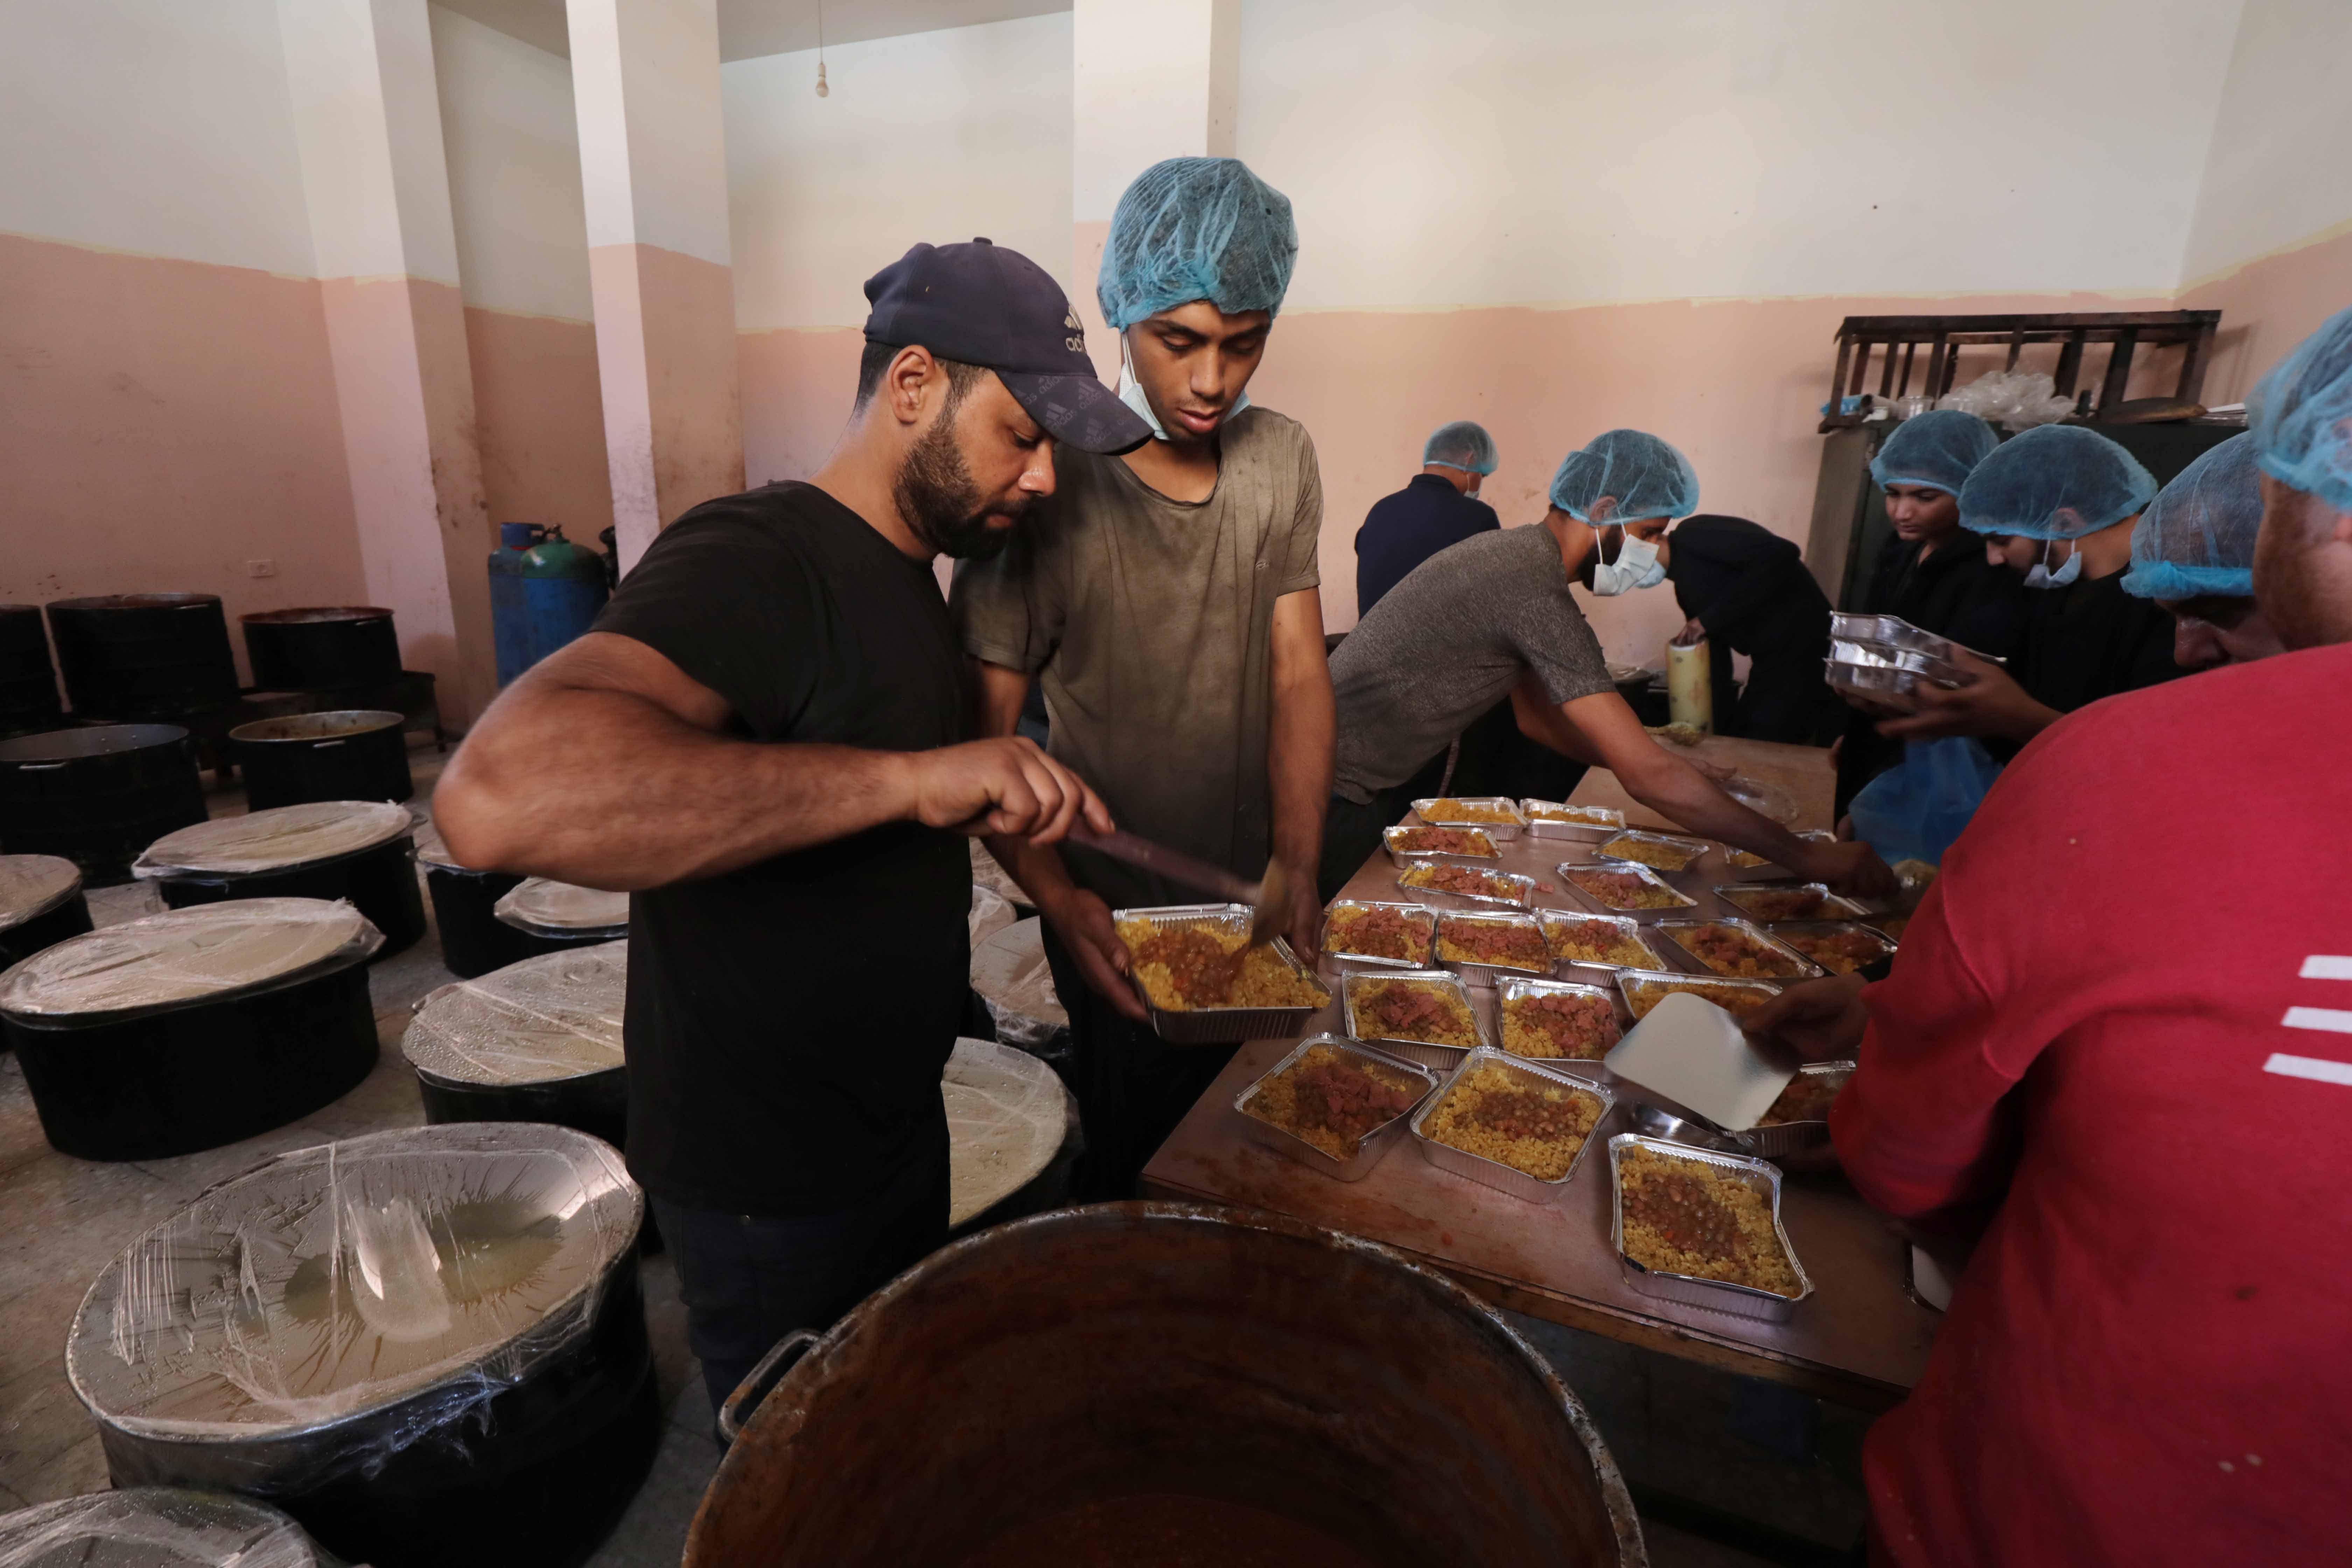 Palestinian people holding empty bowls try to reach out for food distributed by UNRWA workers at donation point